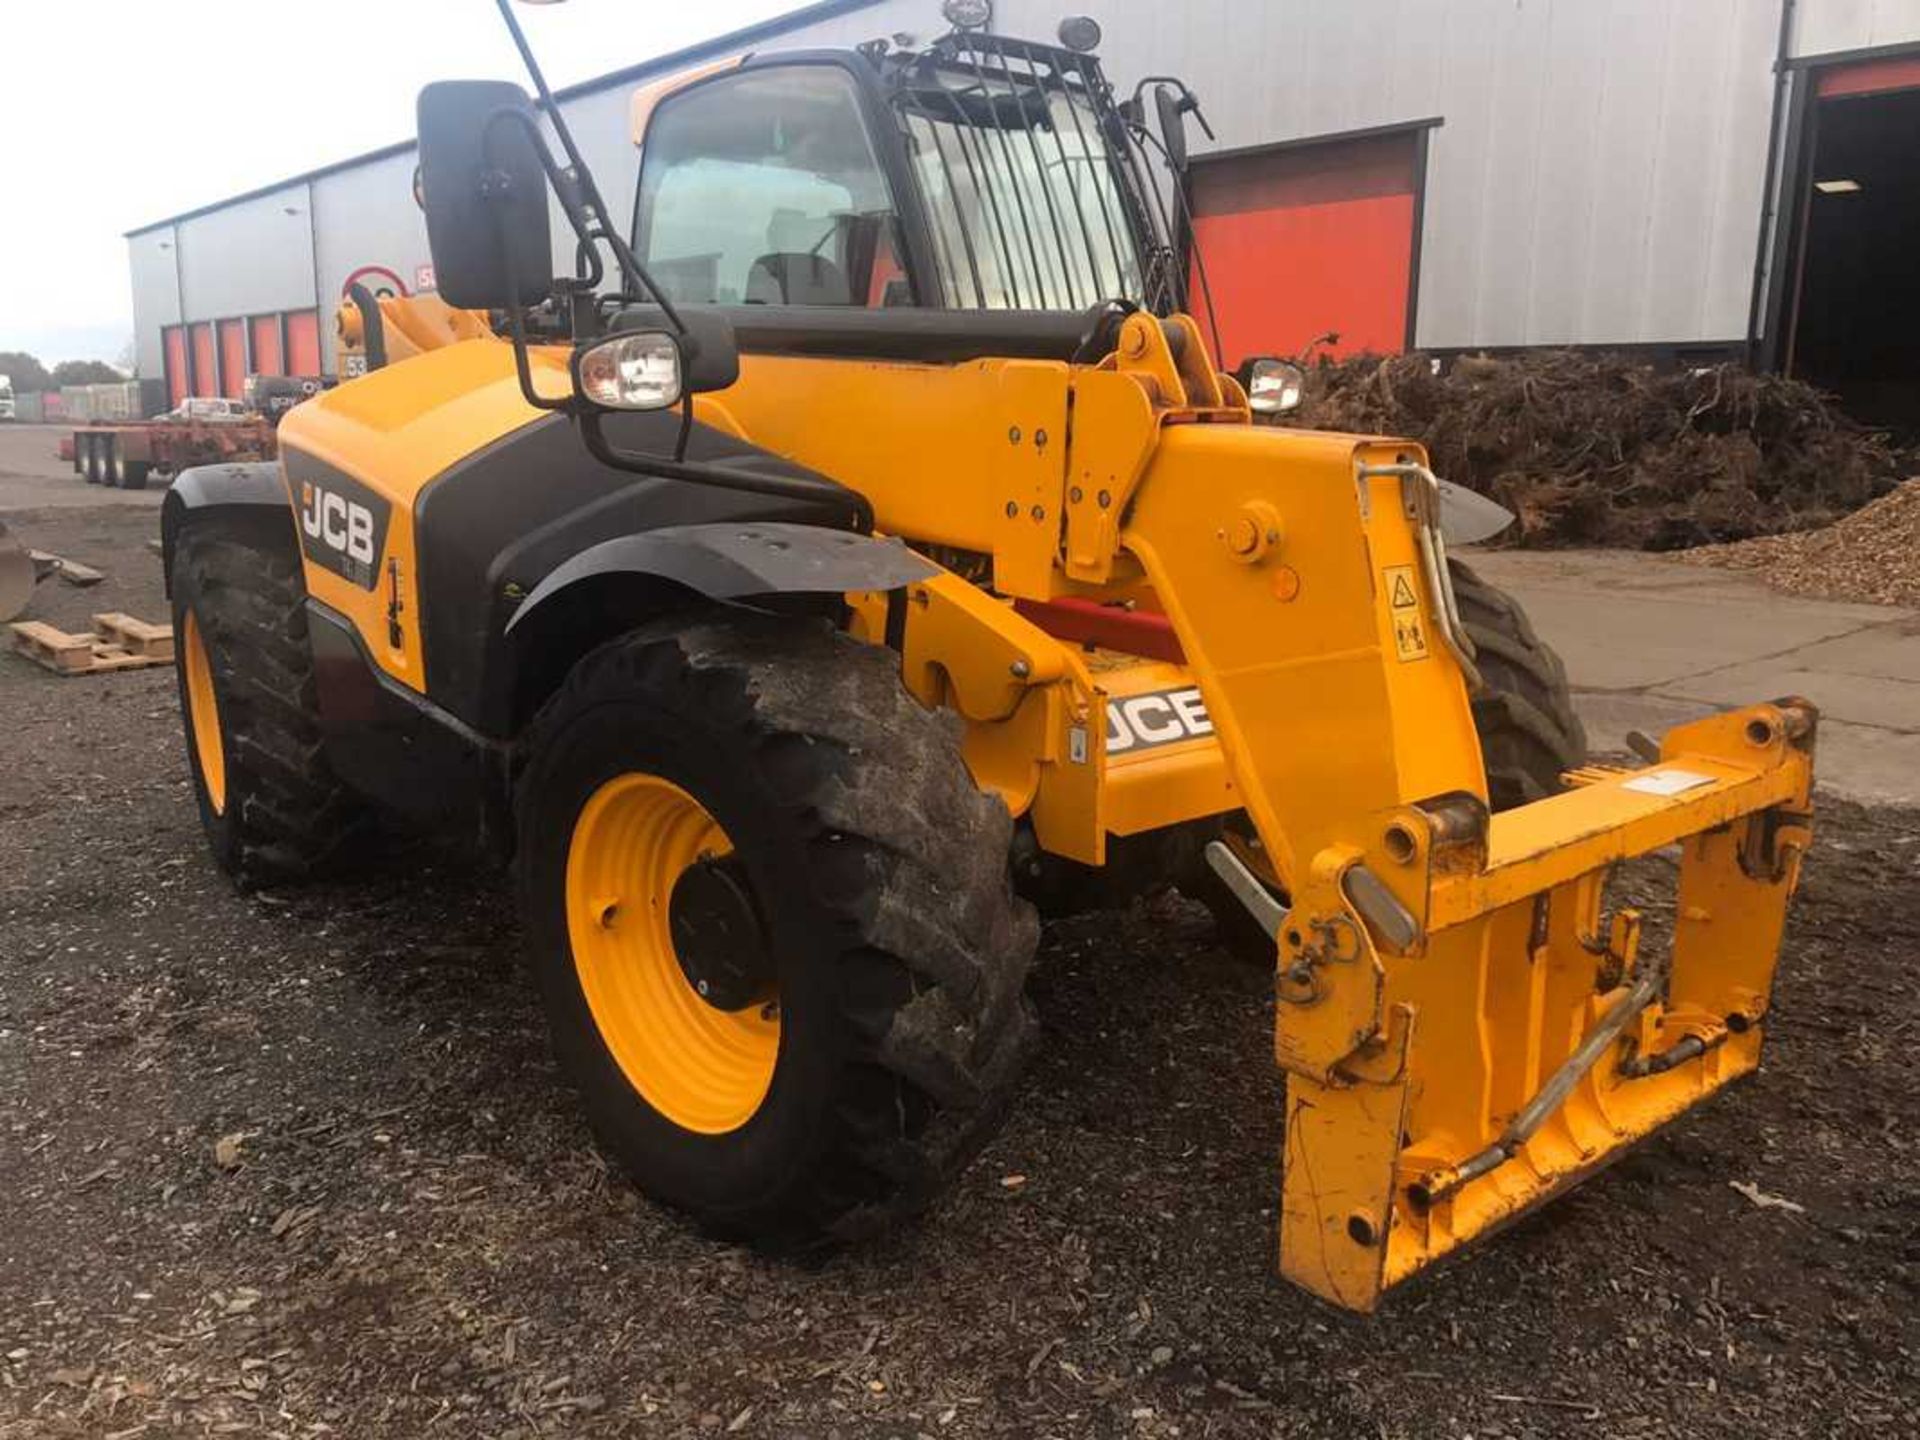 2013 JCB 535-95 TELESCOPIC FOLKLIFT LOW HOURS 771 HRS SOLD WITH NO BUCKETS OR FORKS REG MX13 MWF